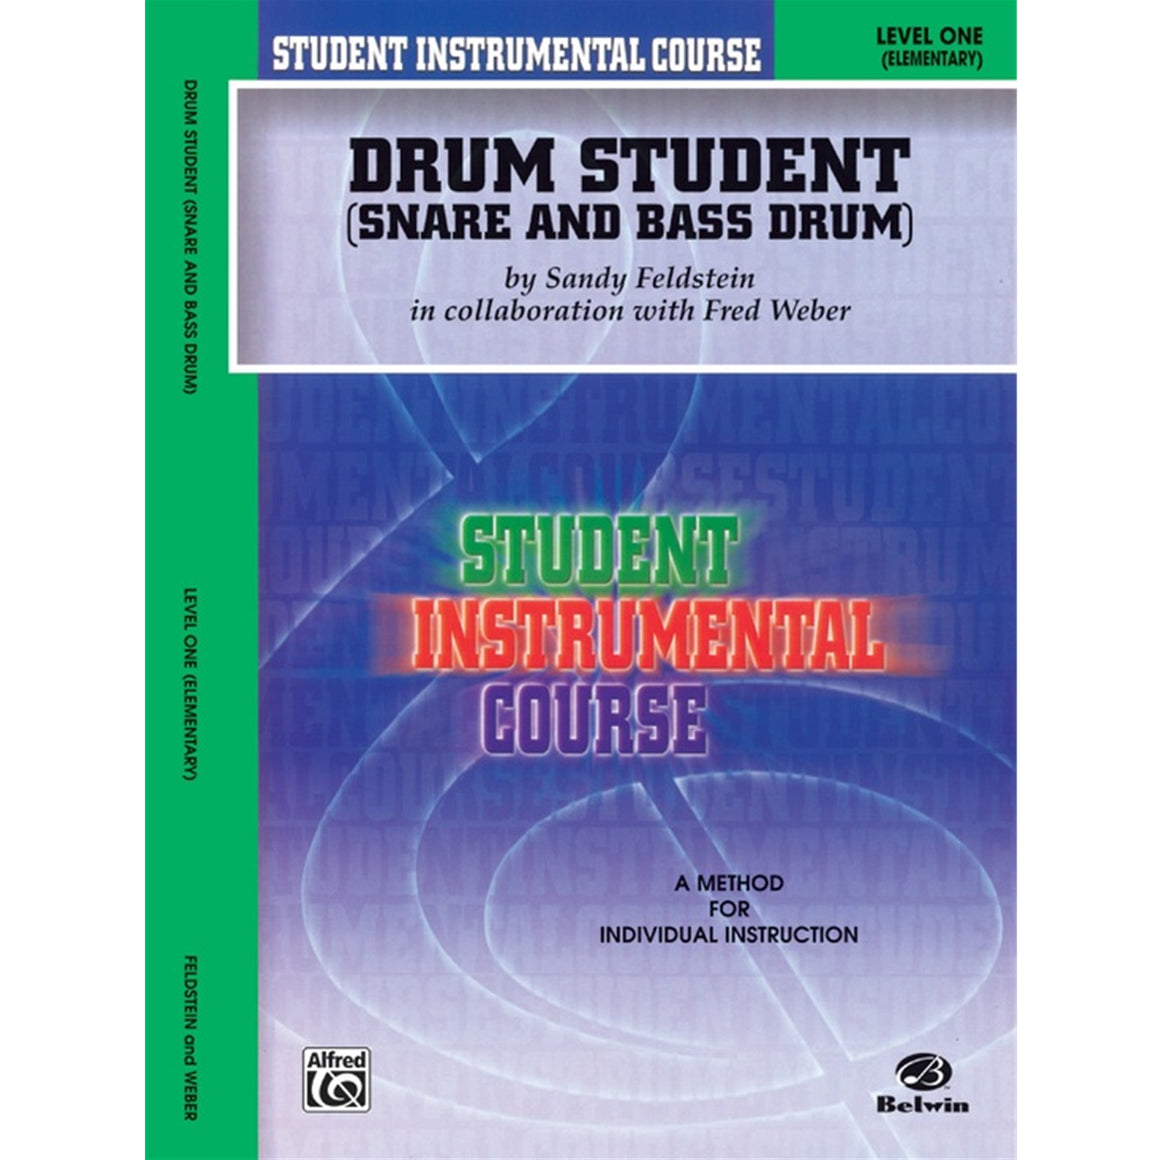 ALFRED 00BIC00171A Student Instrumental Course: Drum Student, Level I [Snare & Bass Drum]